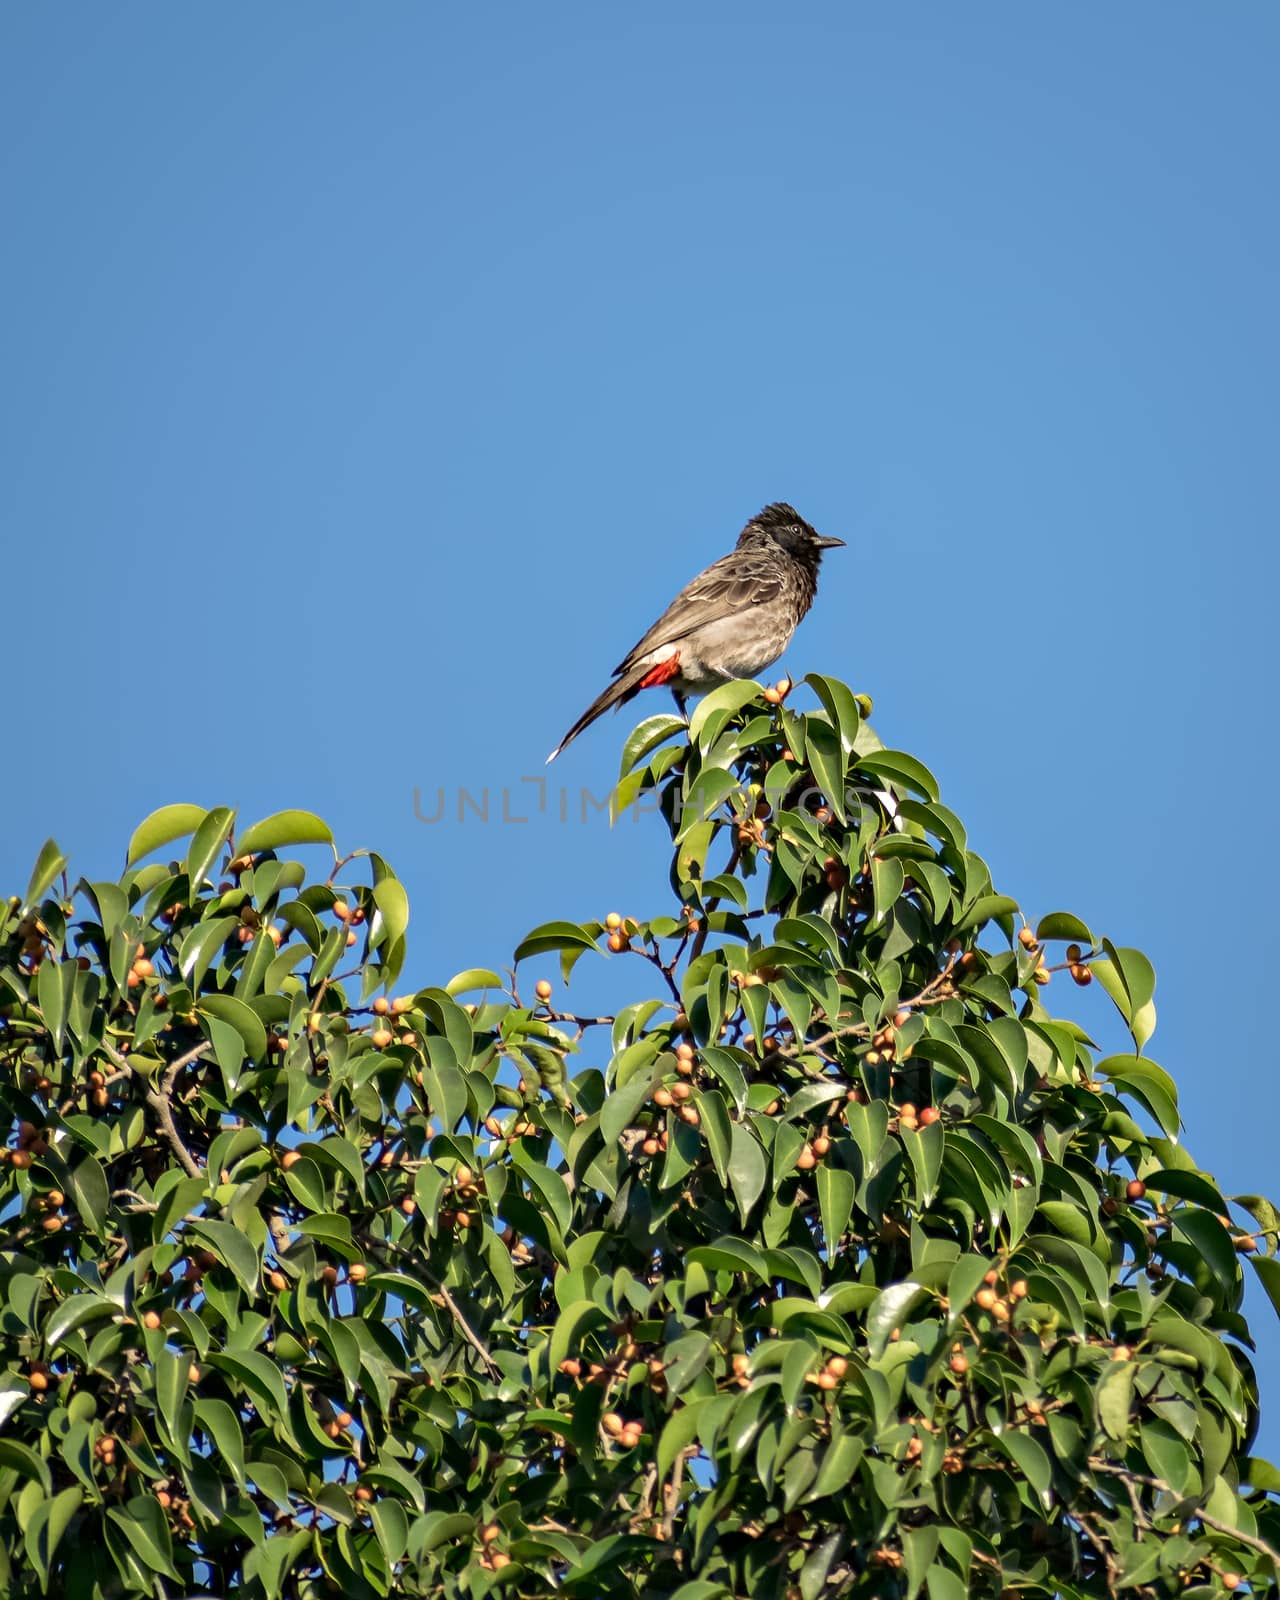 Red vented bulbul sitting on green tree leaves with clear blue sky background.